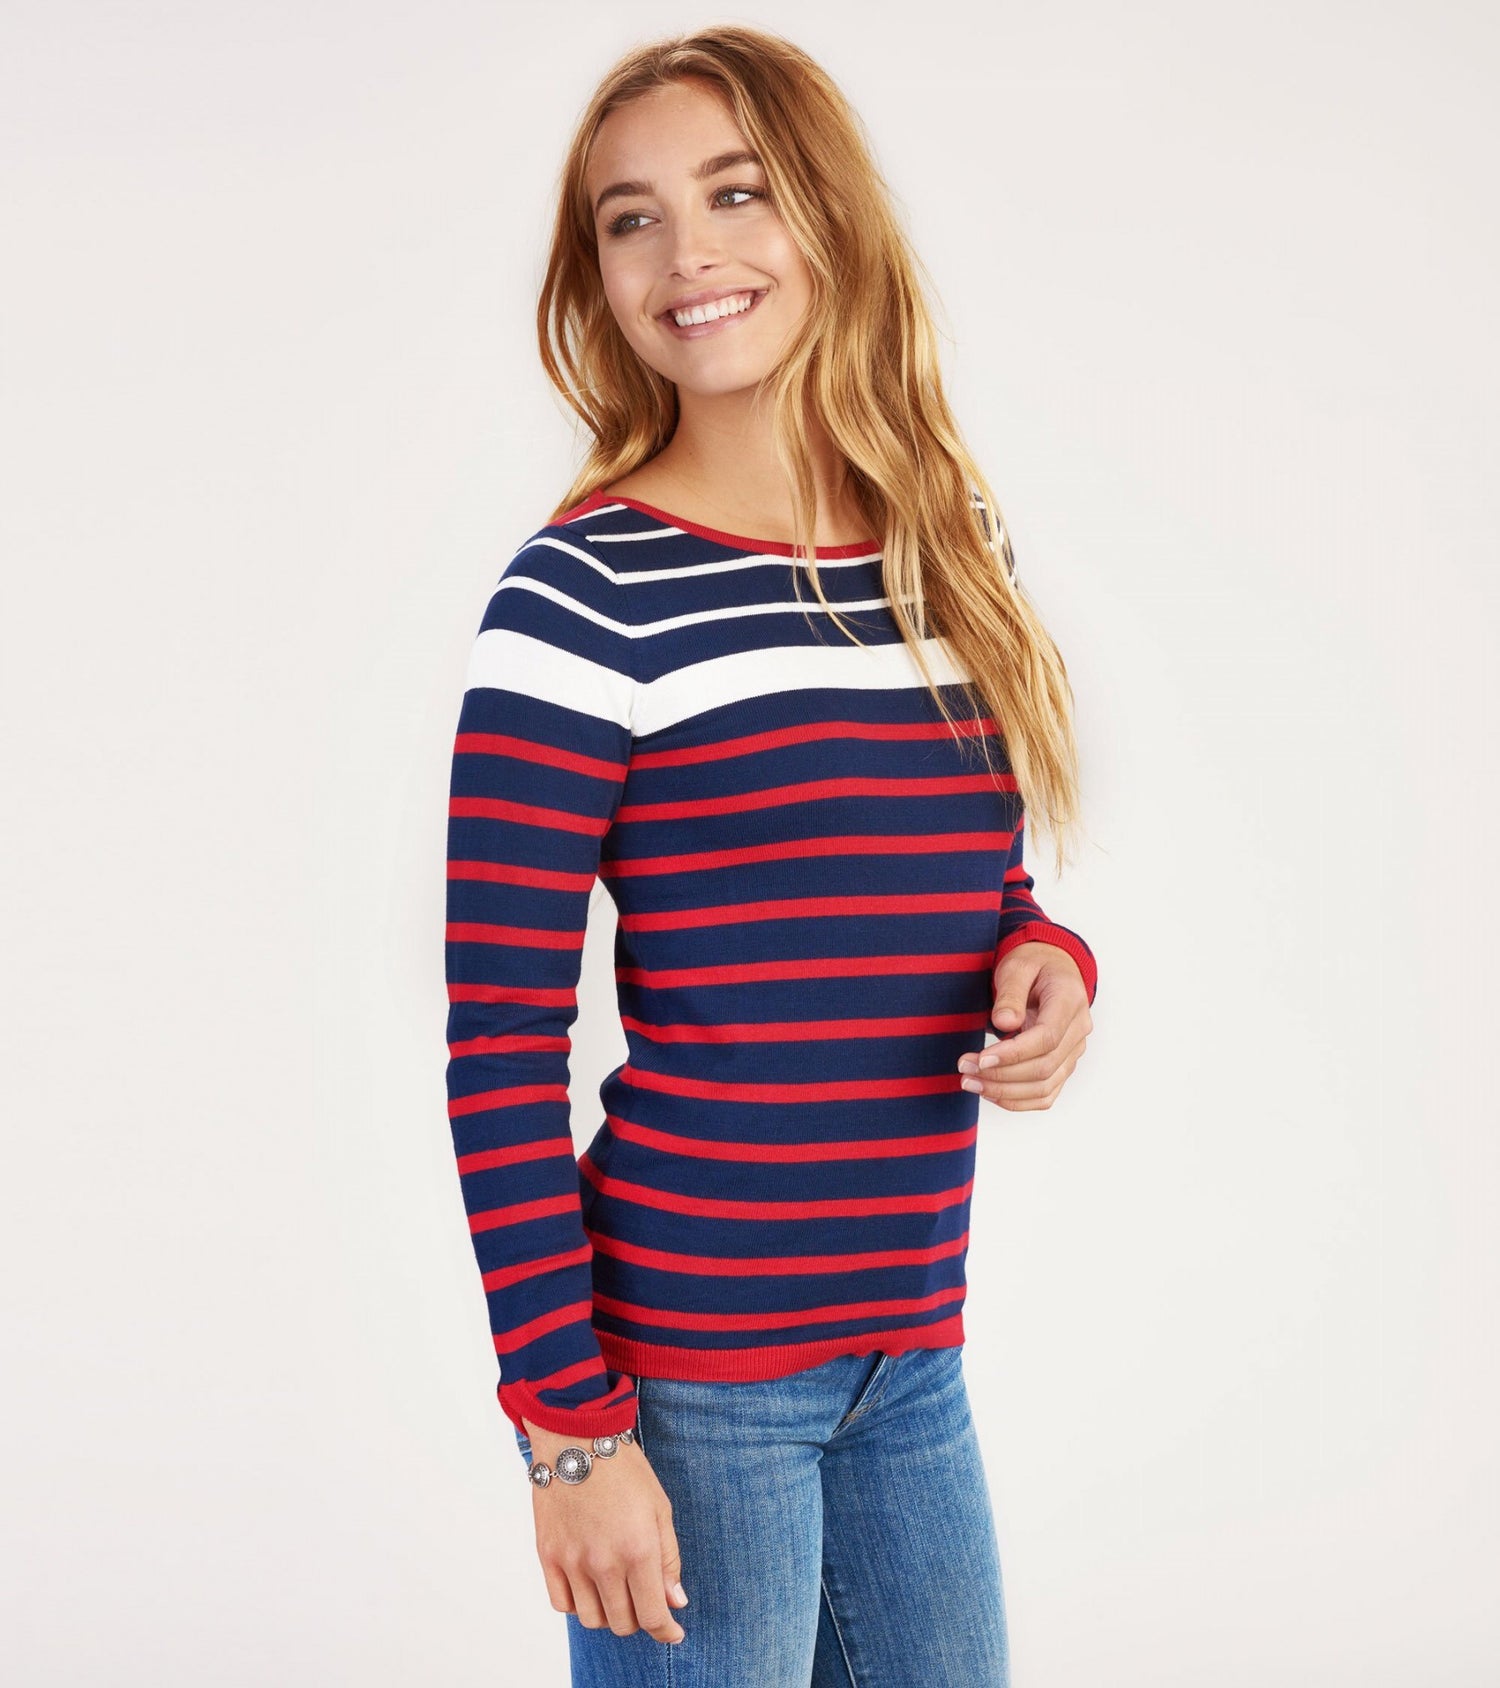 Hatley Breton Sweater - Navy and Red Stripes - Sands Boutique clothing and gifts